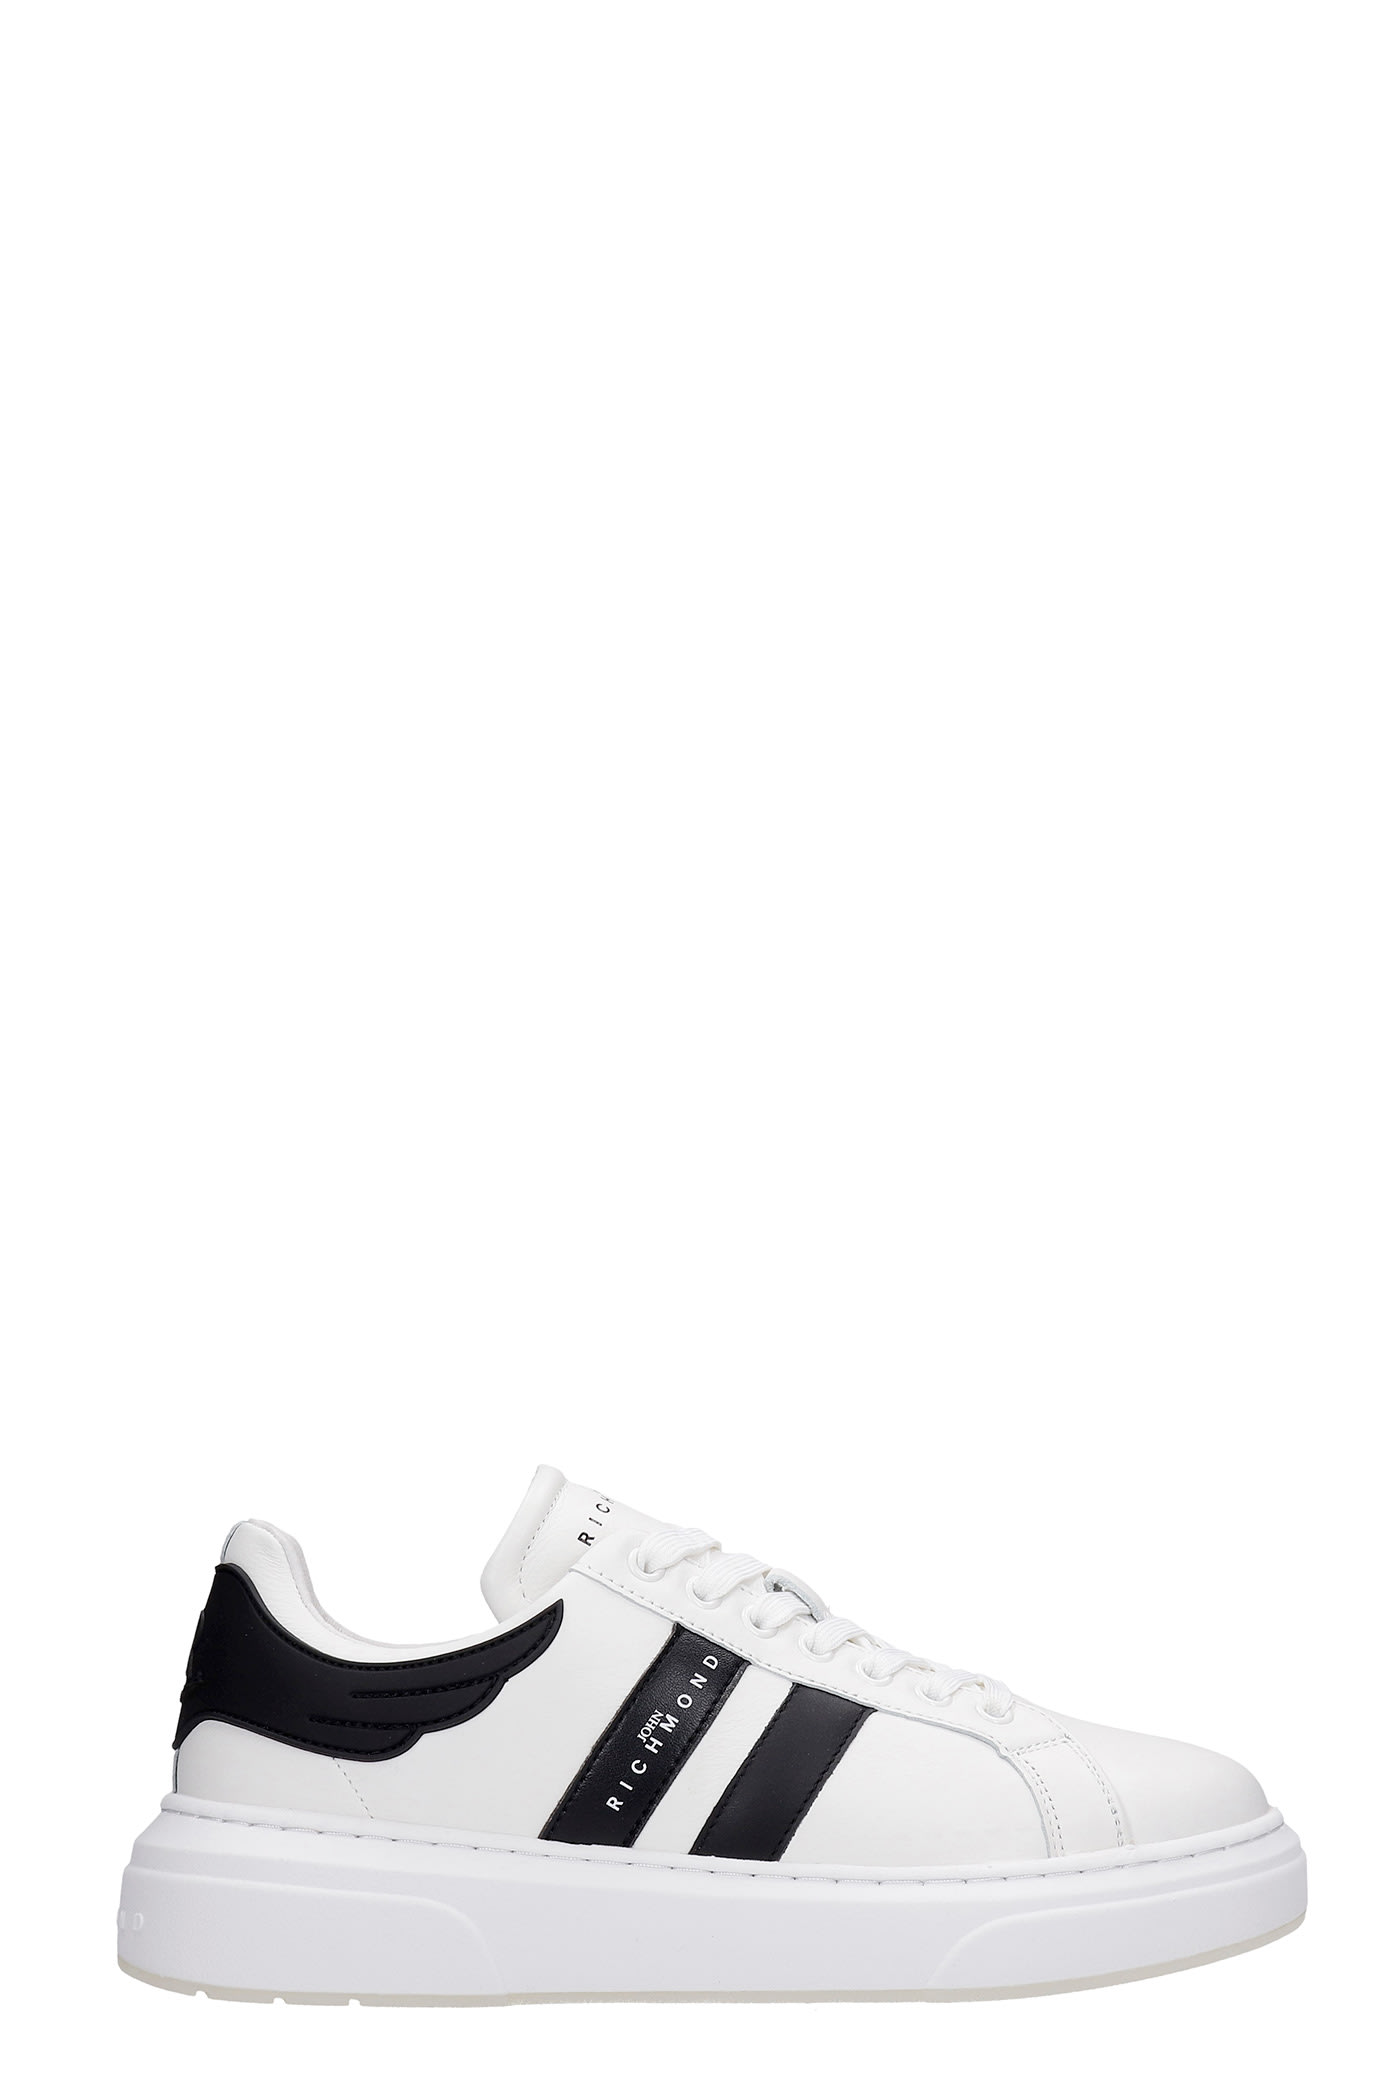 JOHN RICHMOND SNEAKERS IN WHITE LEATHER,10116CPB